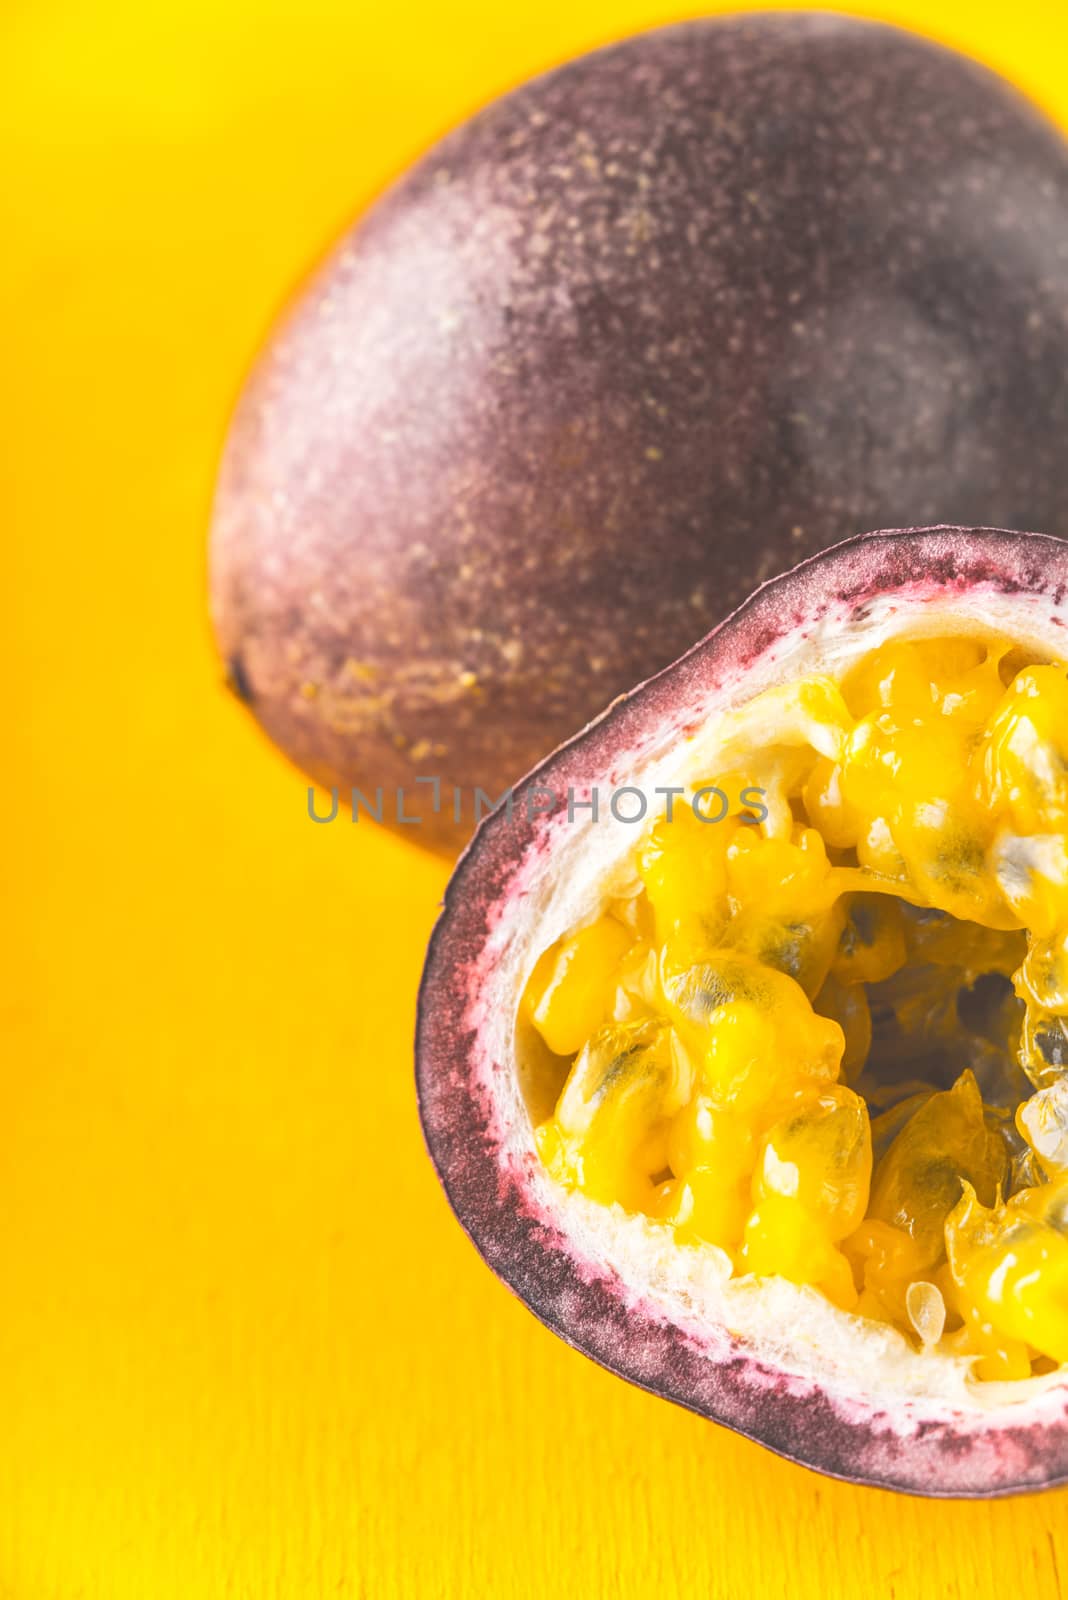 Passion fruit on the yellow background vertical by Deniskarpenkov